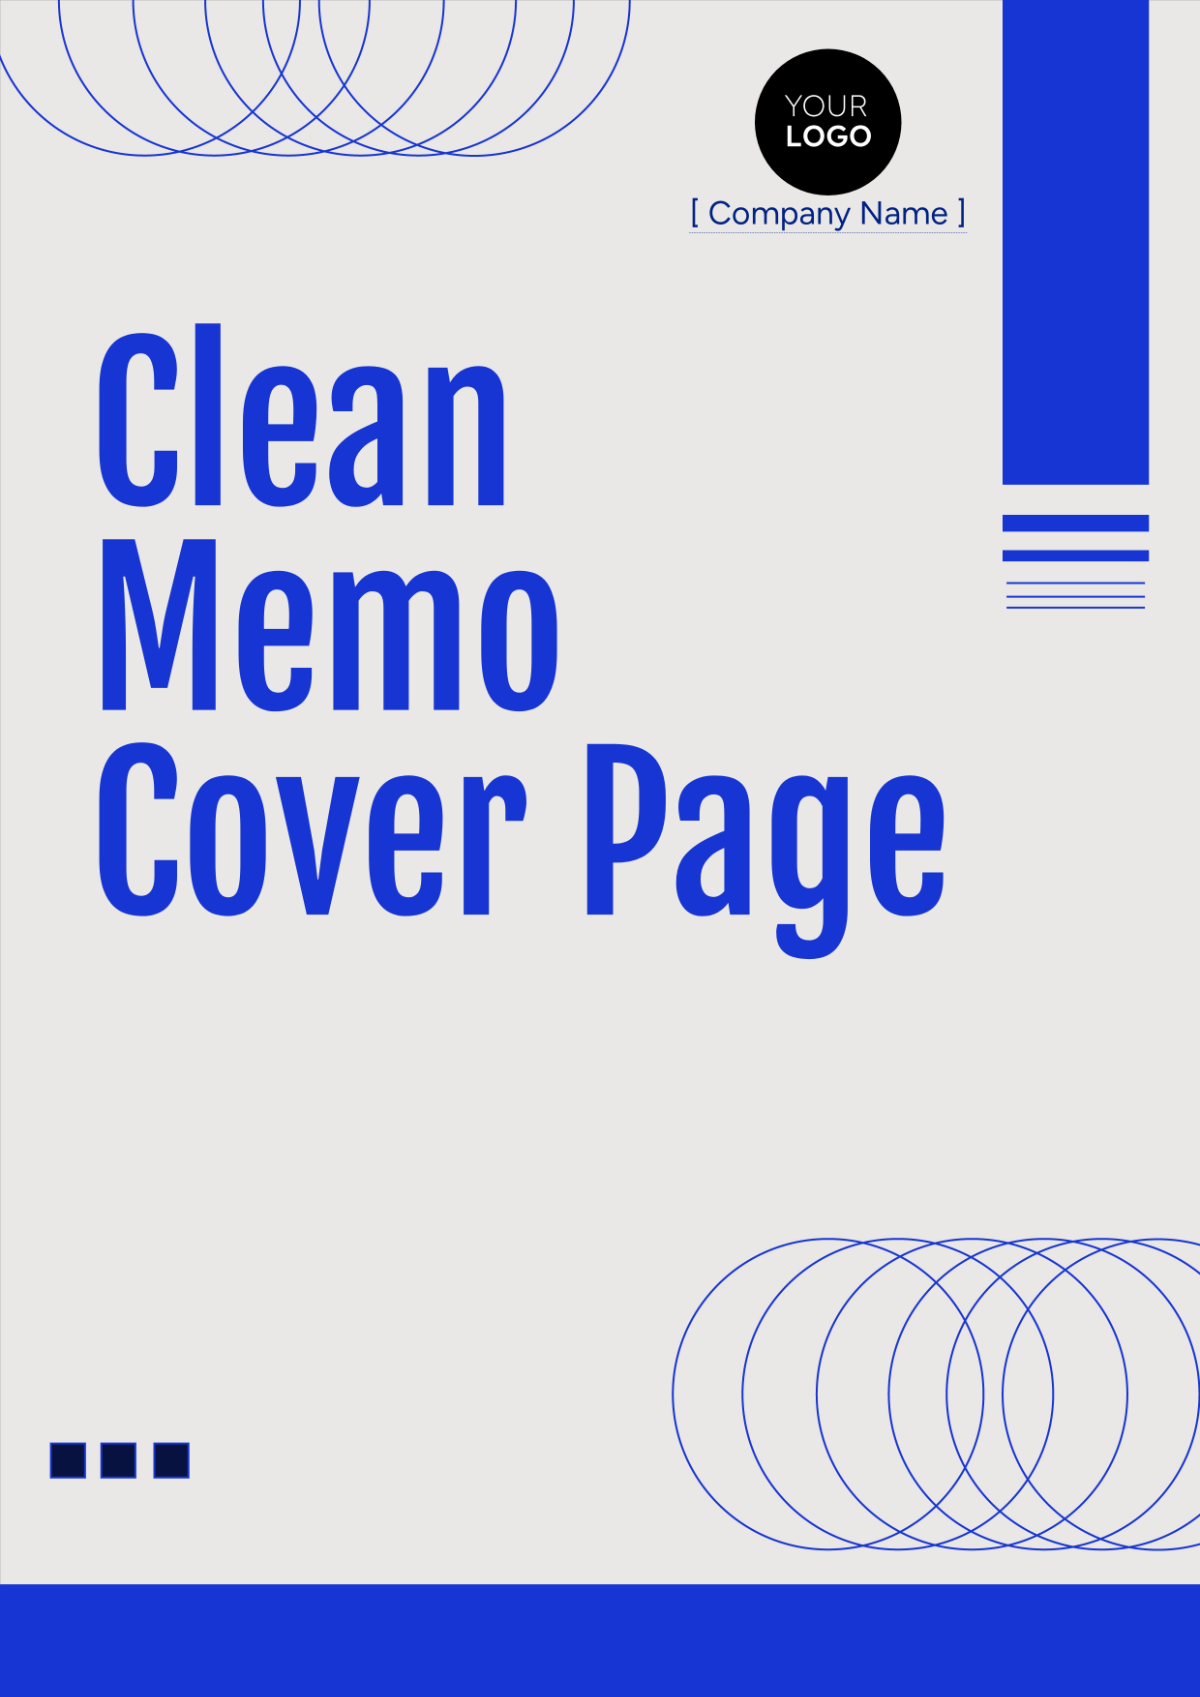 Clean Memo Cover Page Template